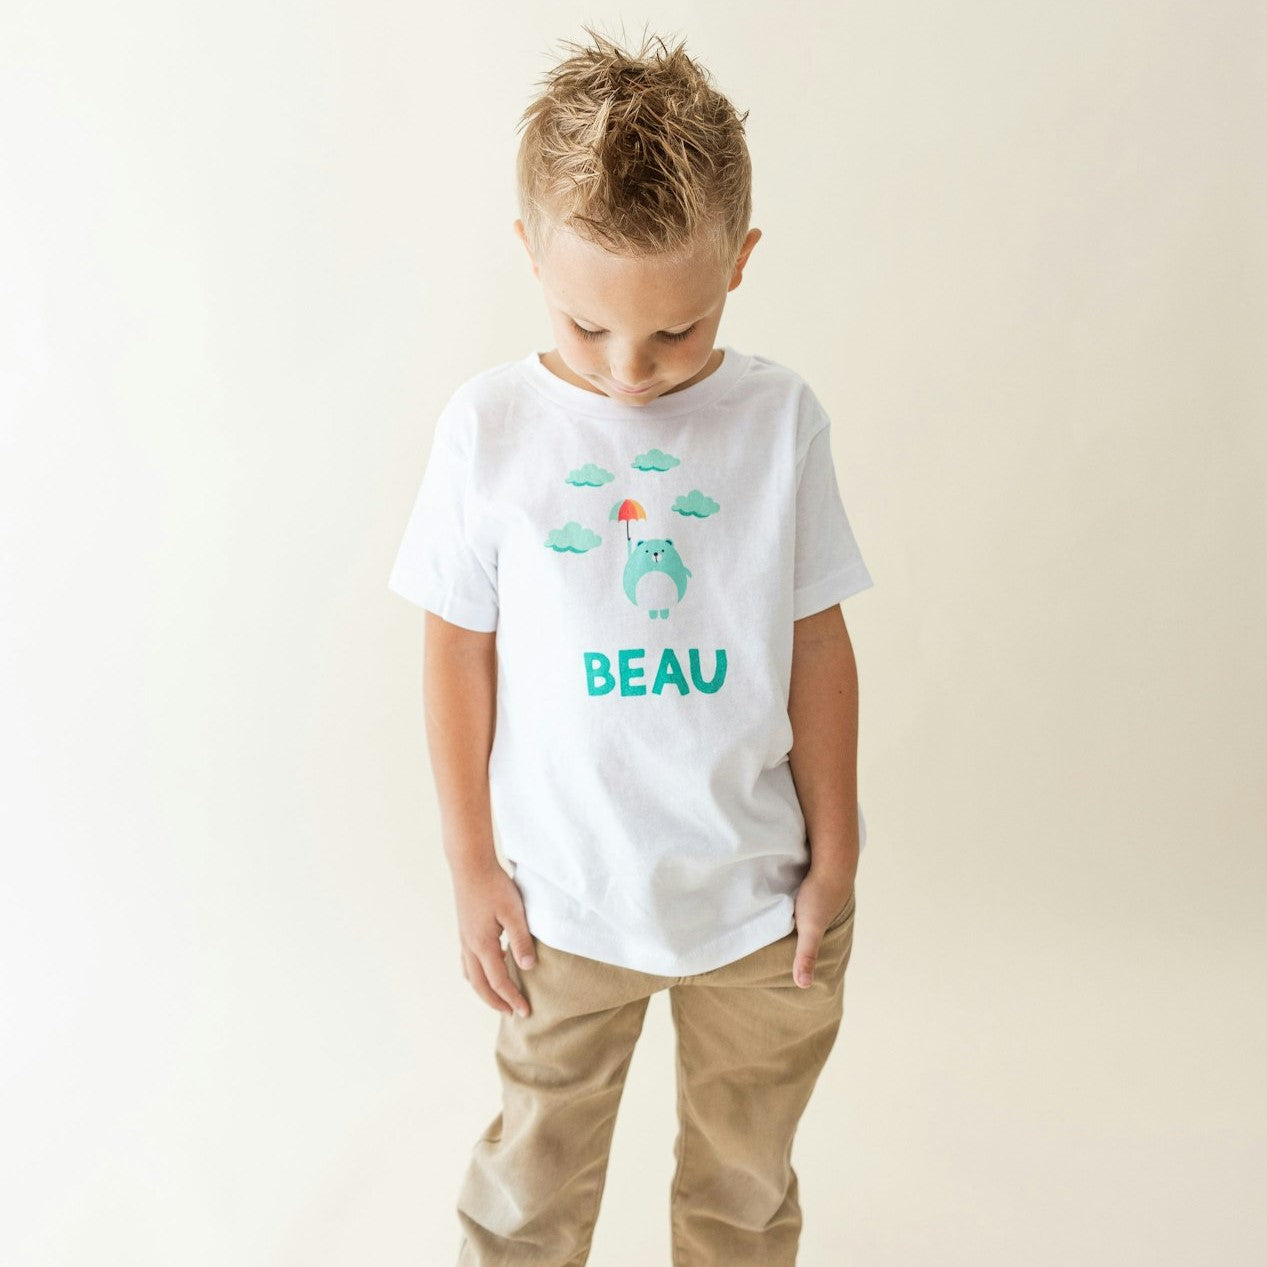 personalized shirts for kids and toddlers